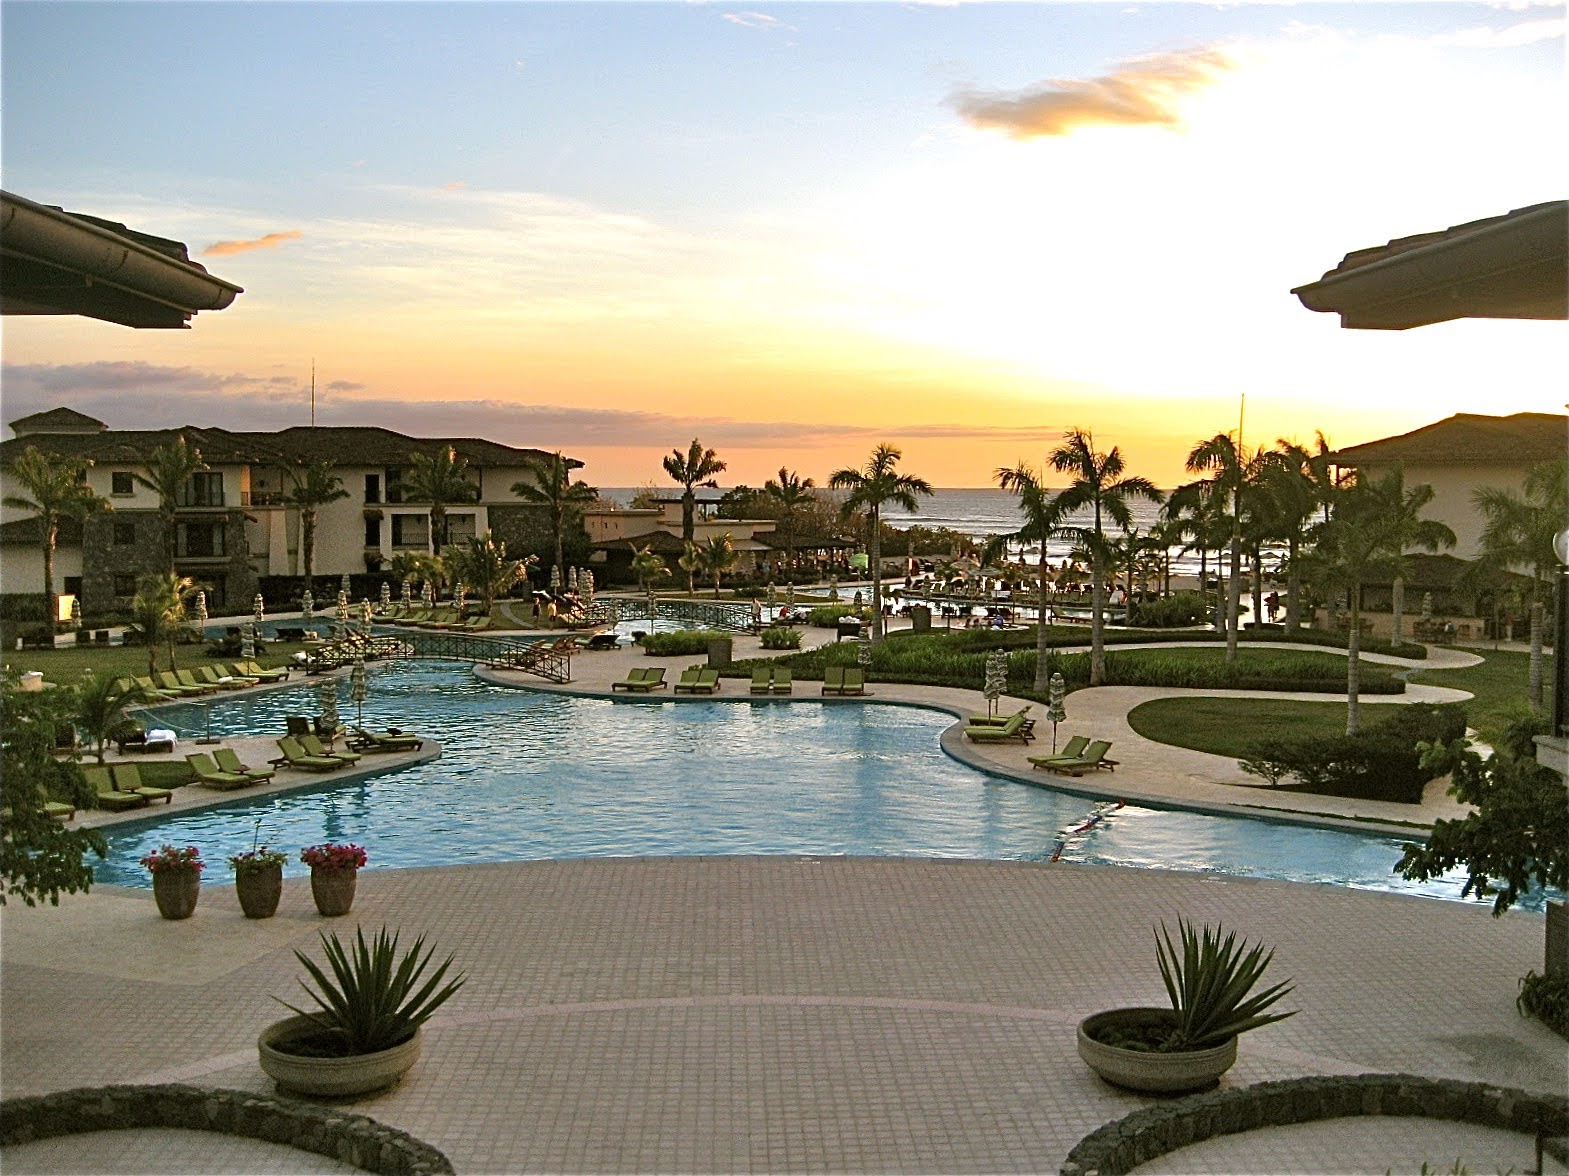 Sunset views from the entrance balcony of the pool and the ocean.